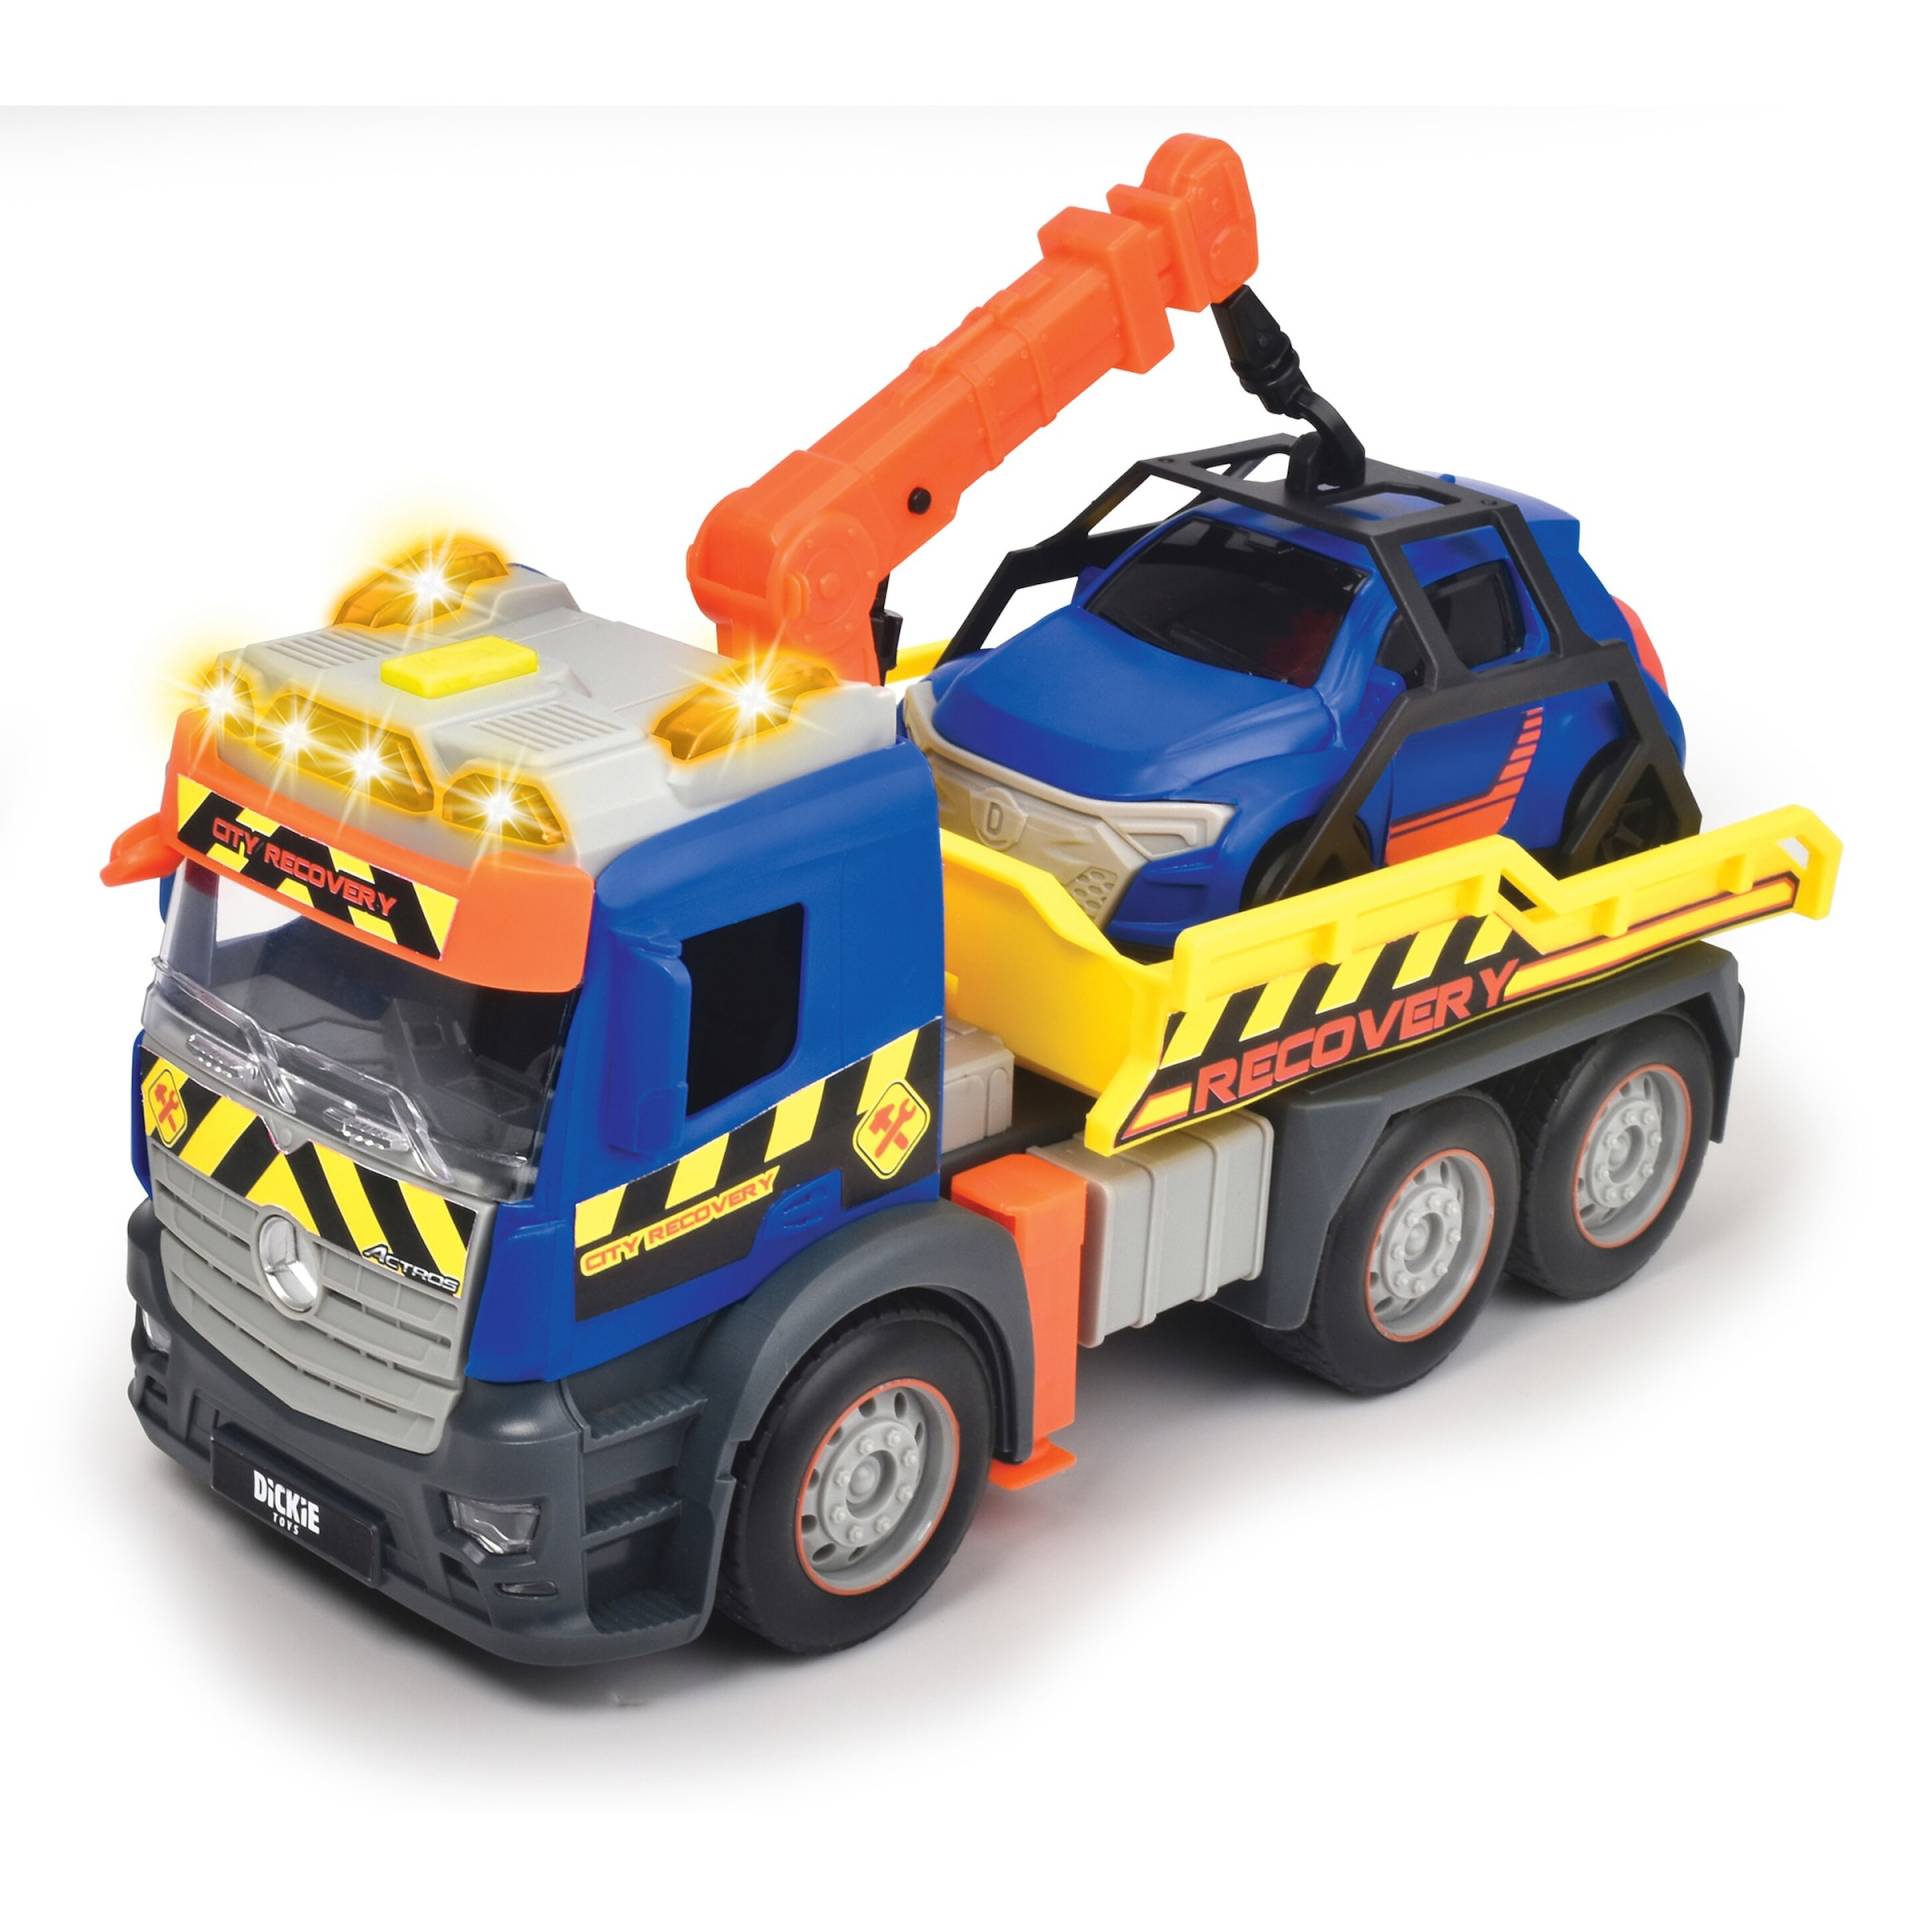 Dickie Toys Abschleppwagen Action Truck - Recovery von Dickie Toys